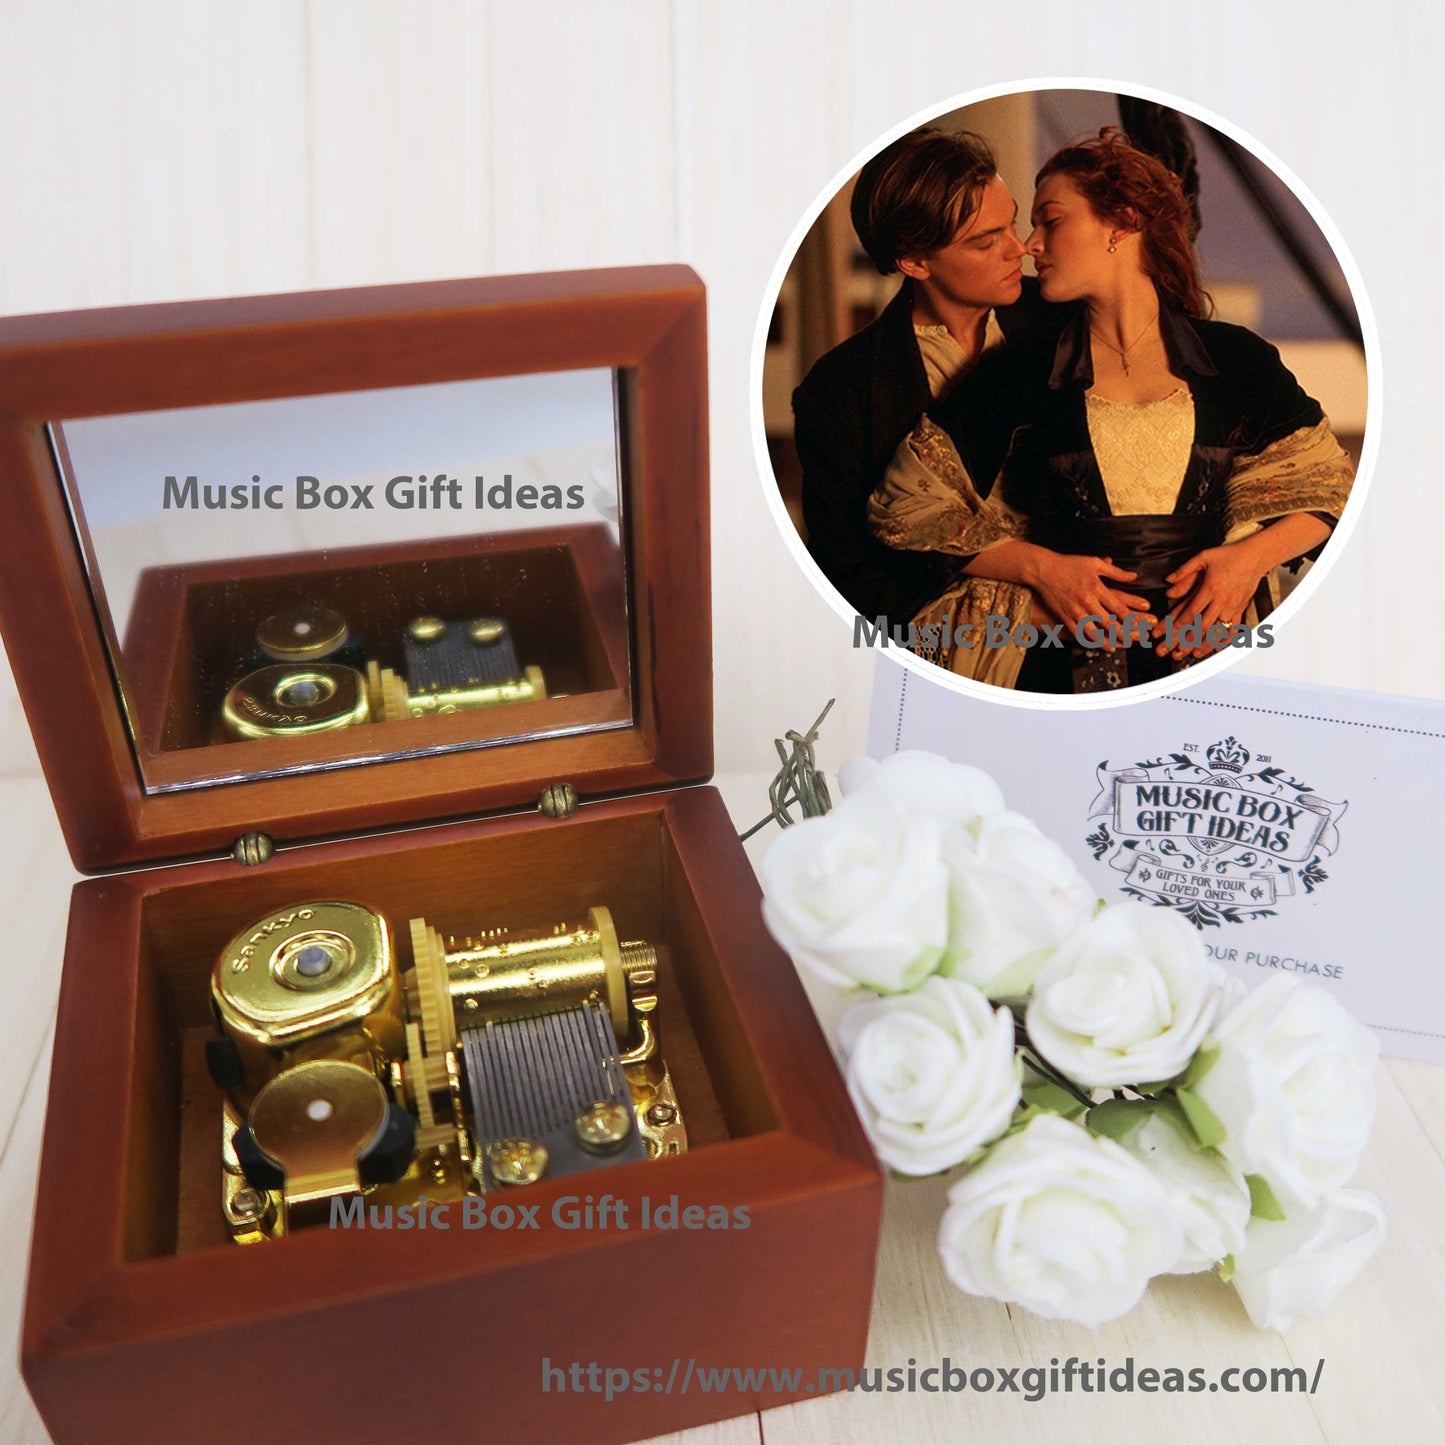 Movie Soundtrack Titanic My Heart Will Go On Celin Dion 18-Note Music Box Gift (Wooden Clockwork) - Music Box Gift Ideas